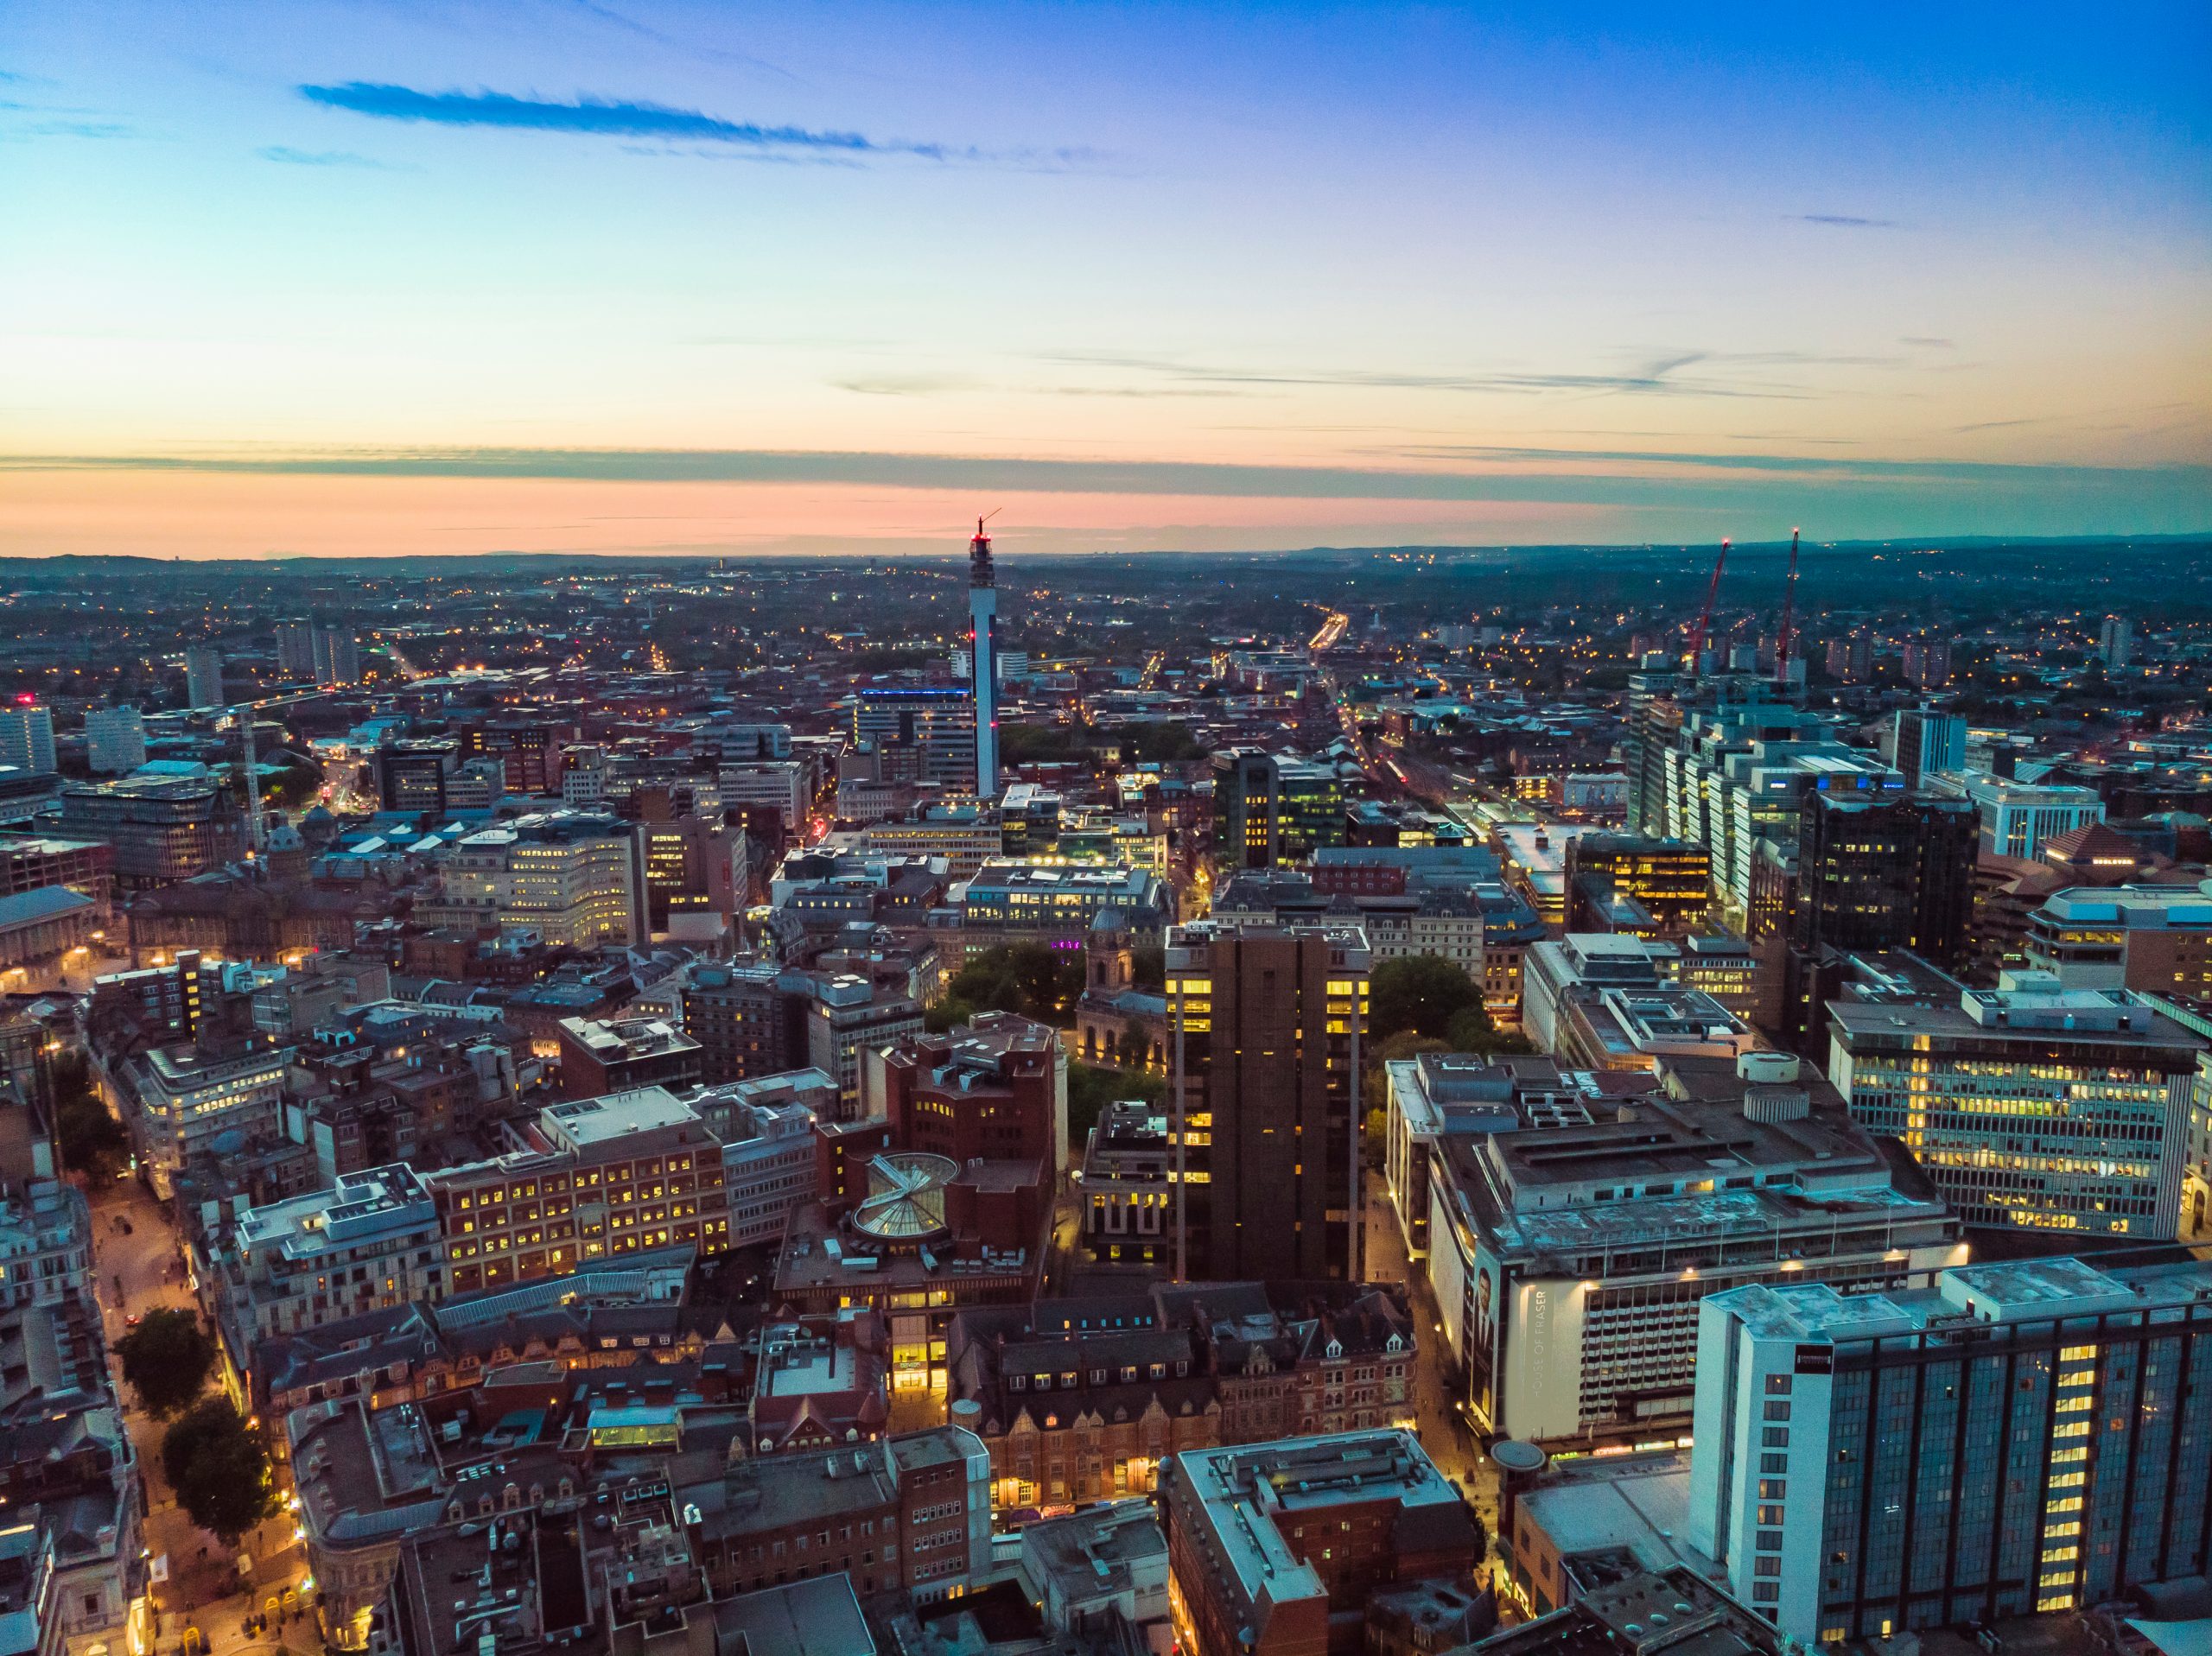 Birmingham: Strongest Levels of Post-Pandemic Recovery